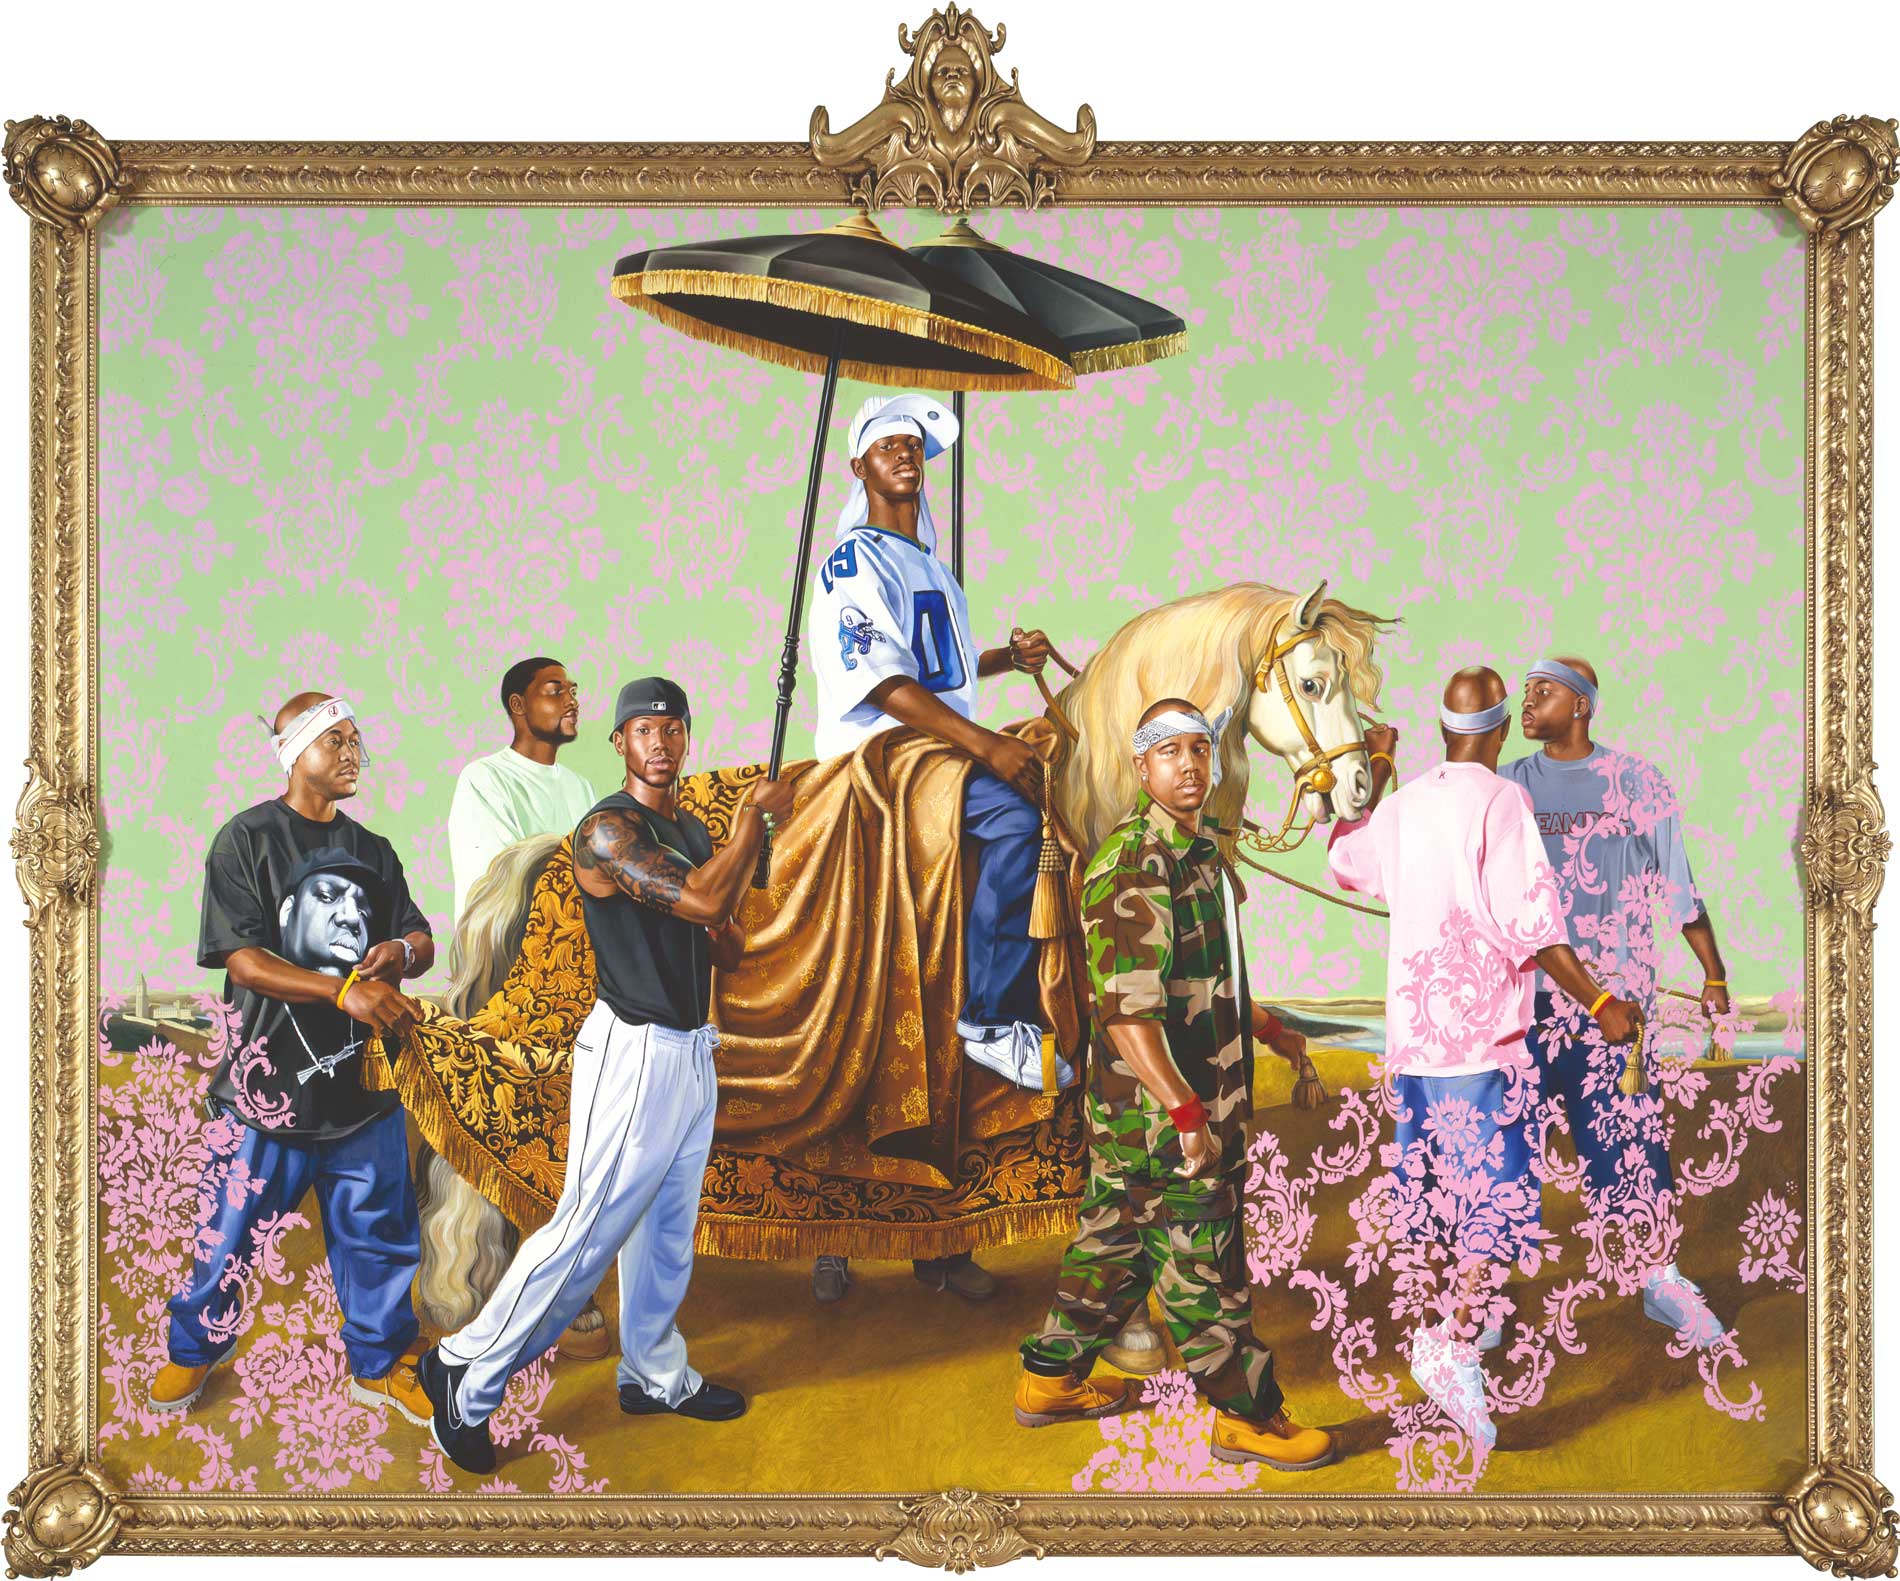 Kehinde Wiley | Rumors of War | The Chancellor Seguier on Horseback, 2005 Oil and Enamel on Canvas.  | 6